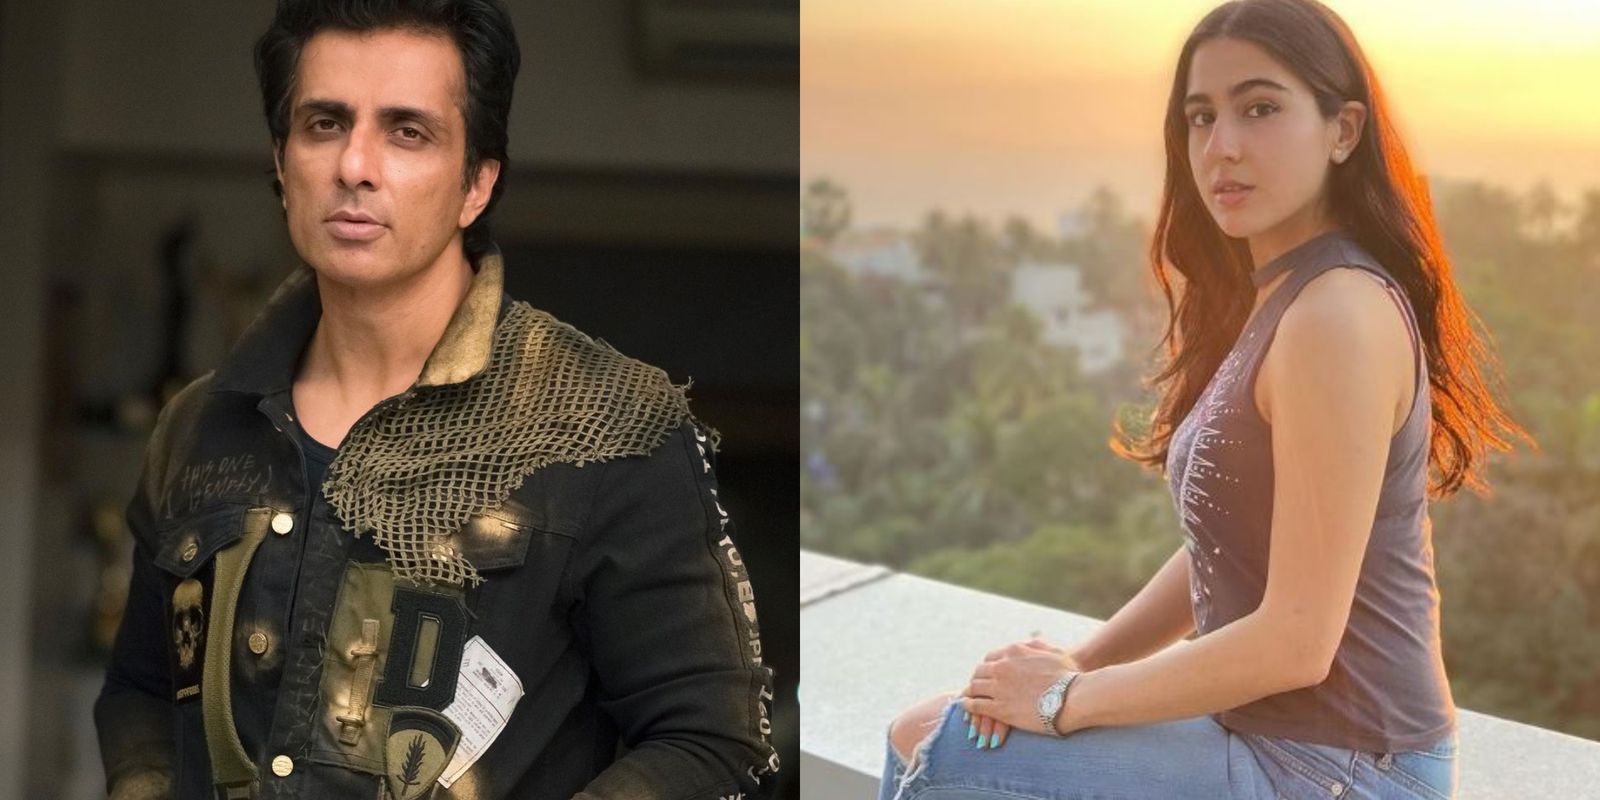 Sara Ali Khan Contributes Funds To Sonu Sood's Foundation For COVID Relief, He Calls Her A 'Hero'